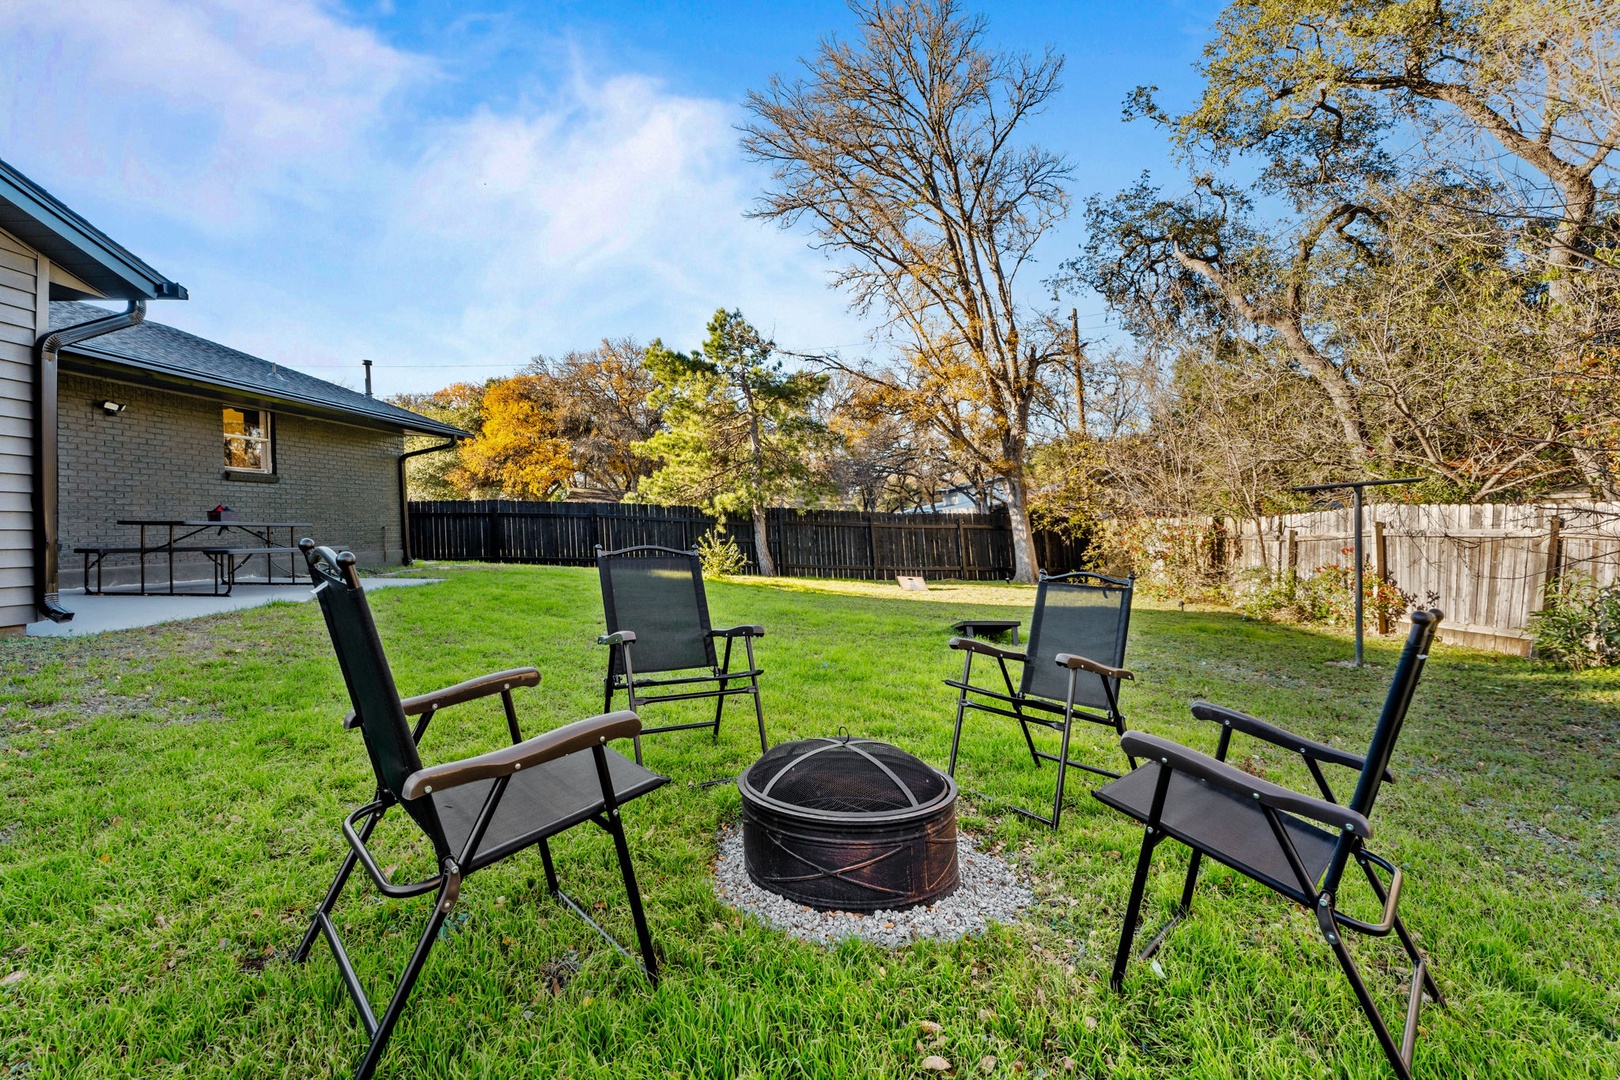 Gather around the firepit & make memories together during your stay